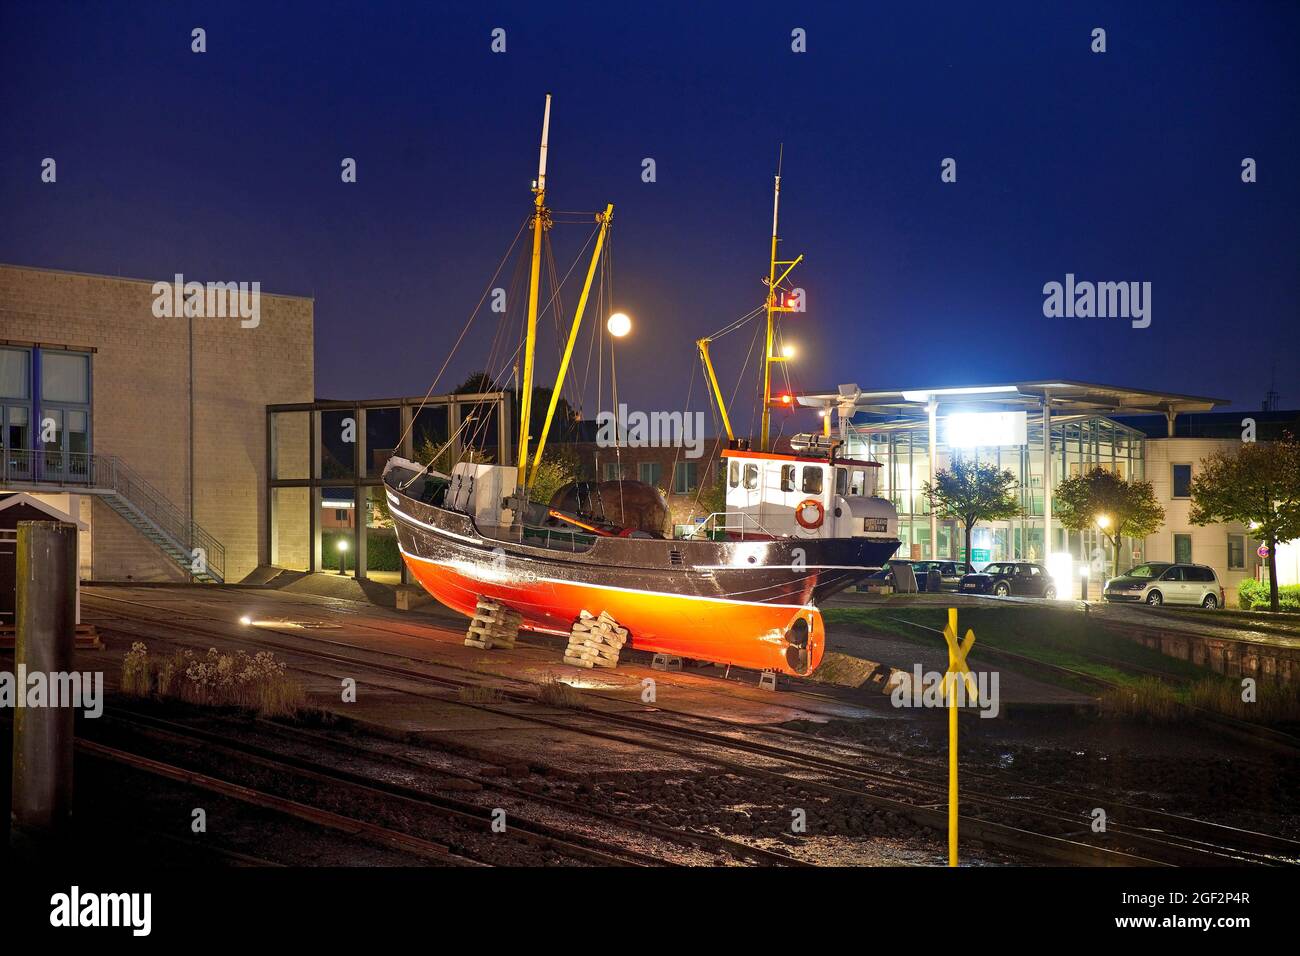 Hildegard buoy tender, museum ship in the inland port in the night, Germany, Schleswig-Holstein, Northern Frisia, Husum Stock Photo